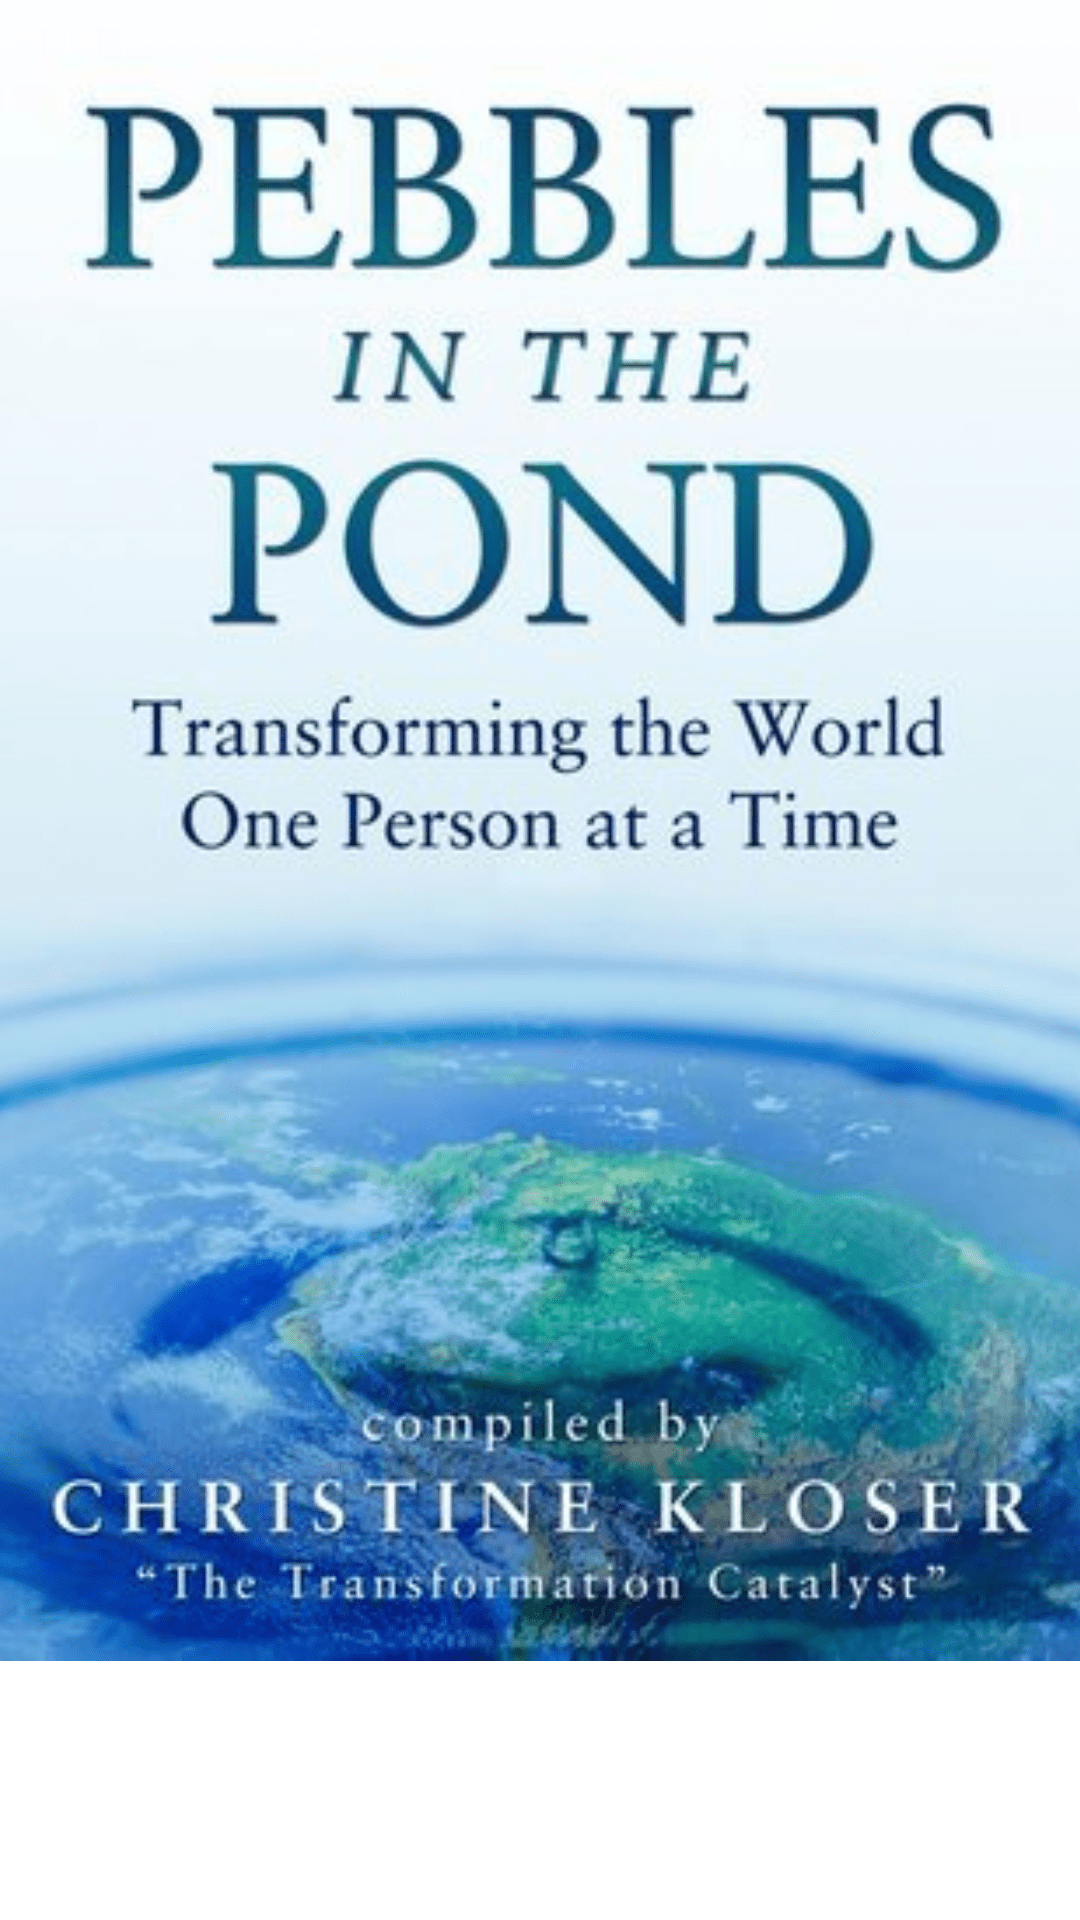 Pebbles in the Pond: Transforming the World One Person at a Time